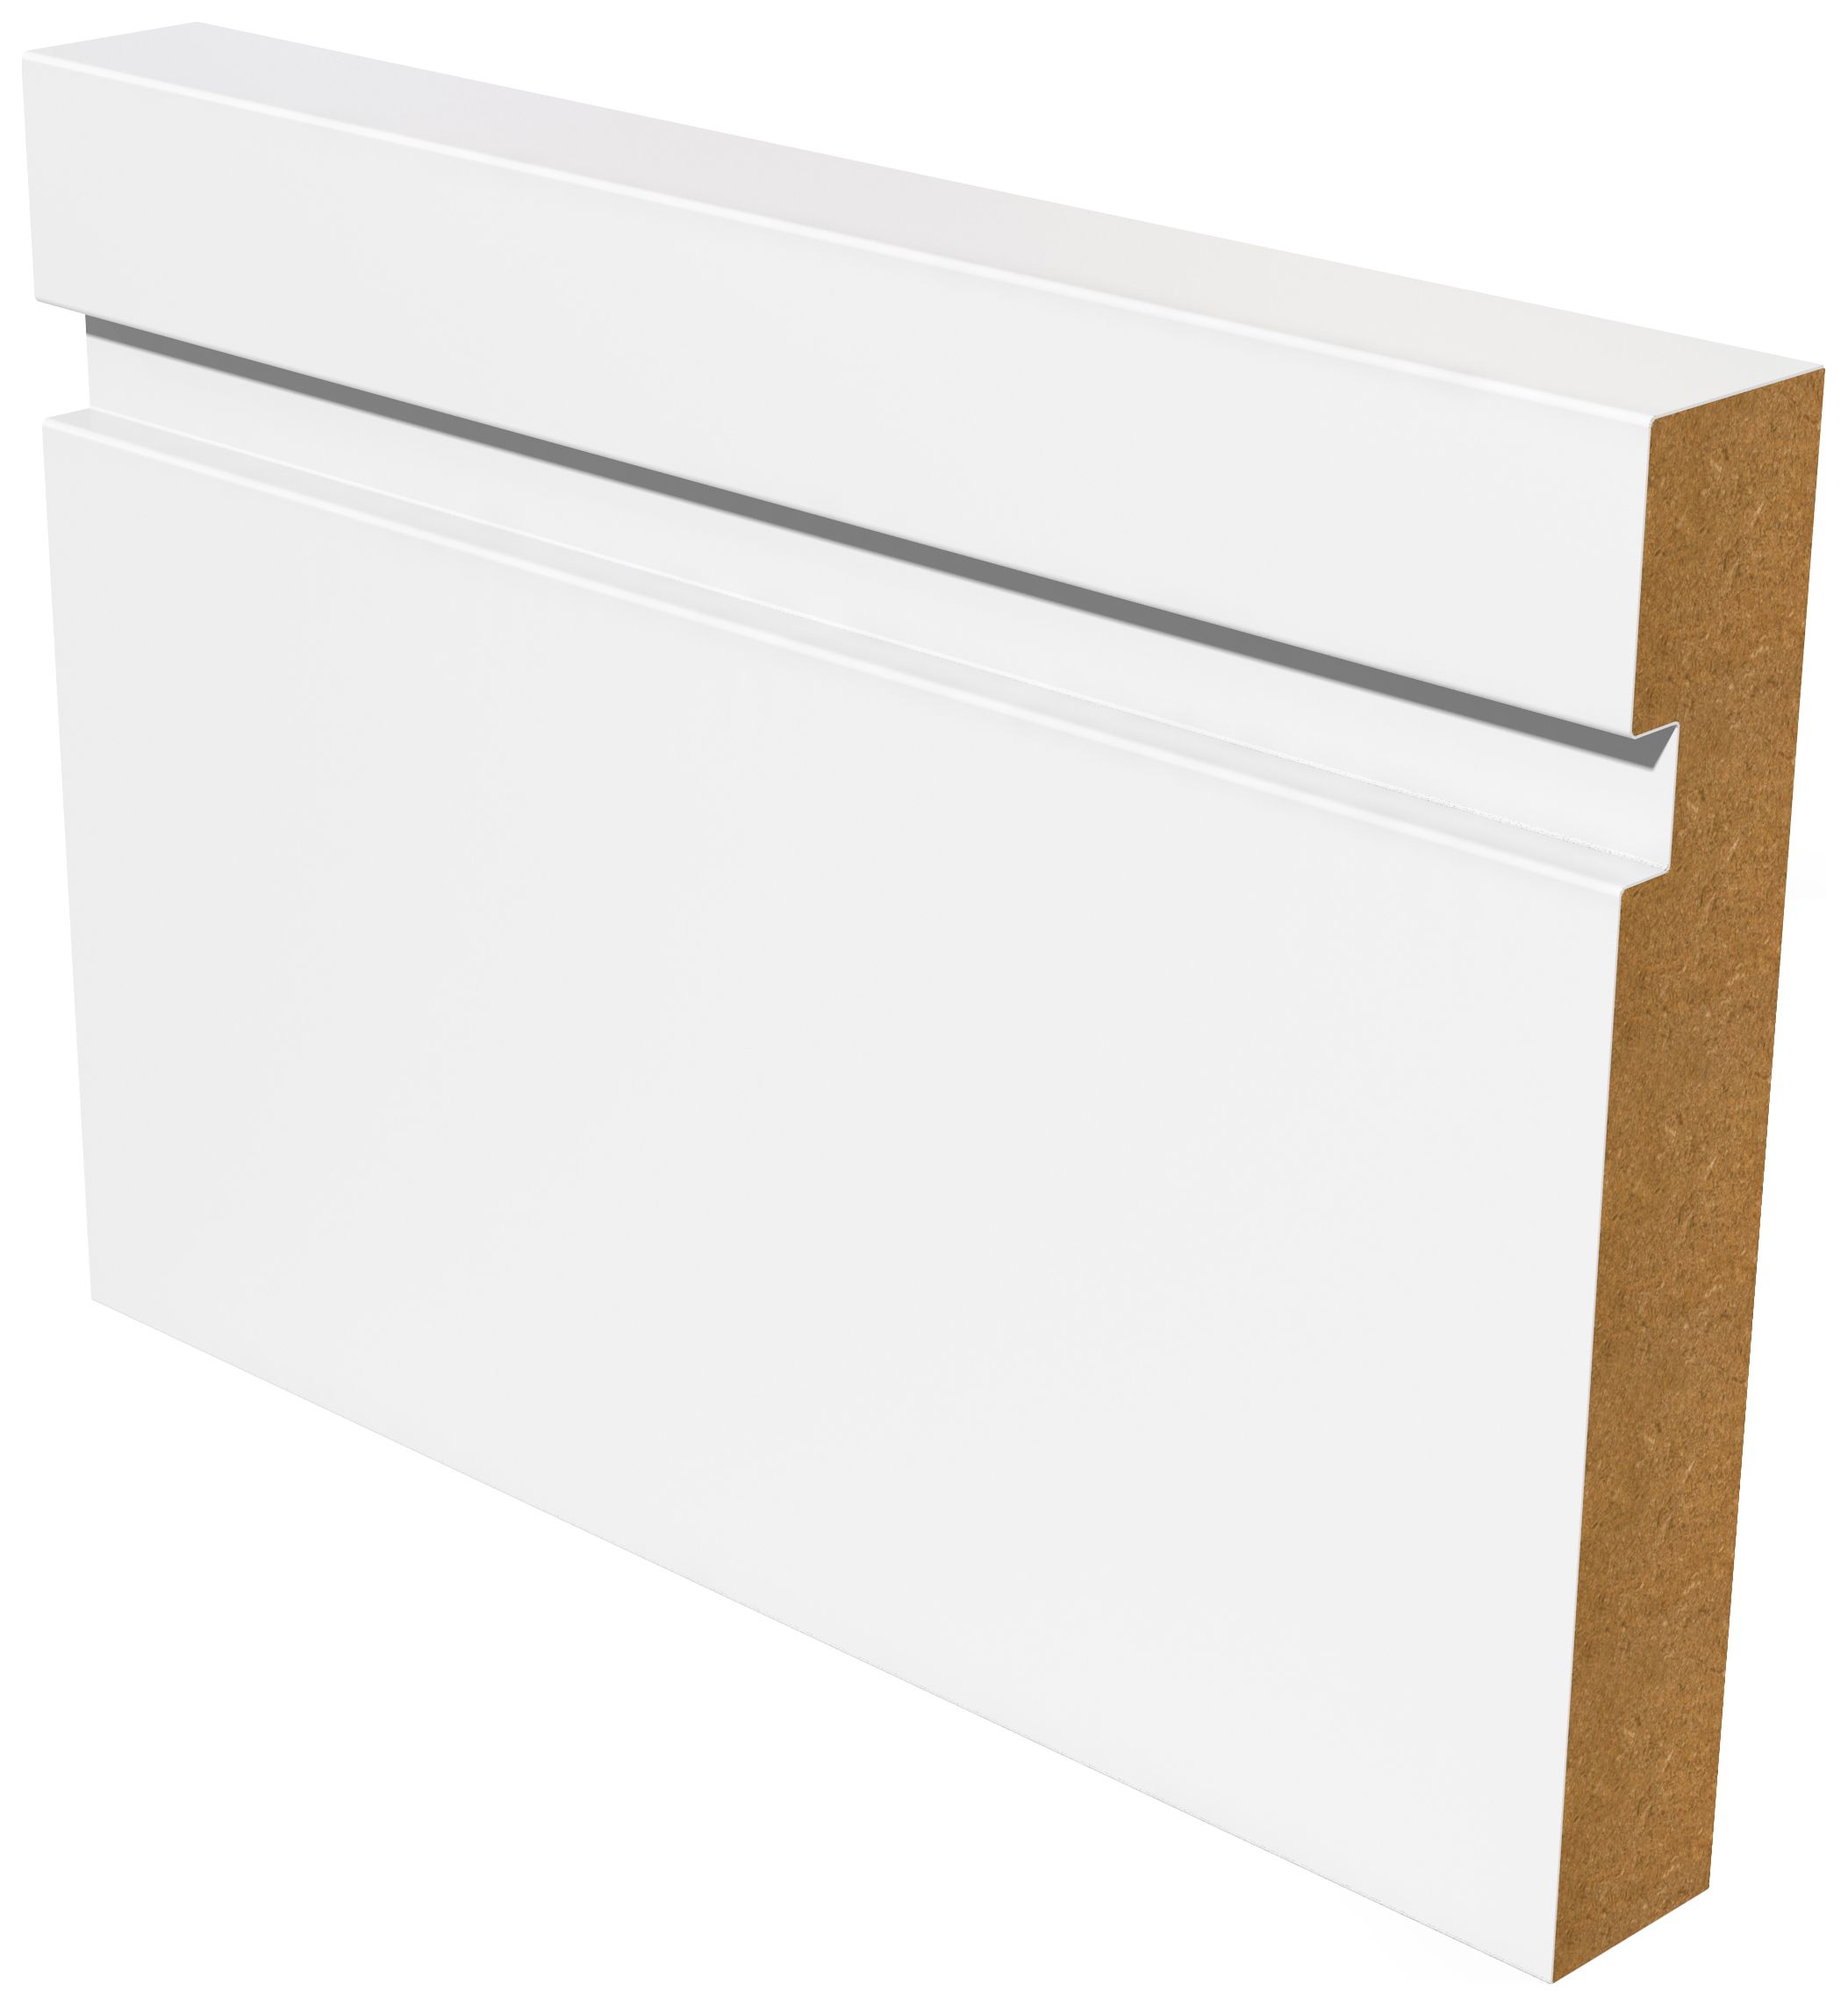 Wickes Grooved Square Edge White MDF Skirting - 18 x 119 x 4200mm